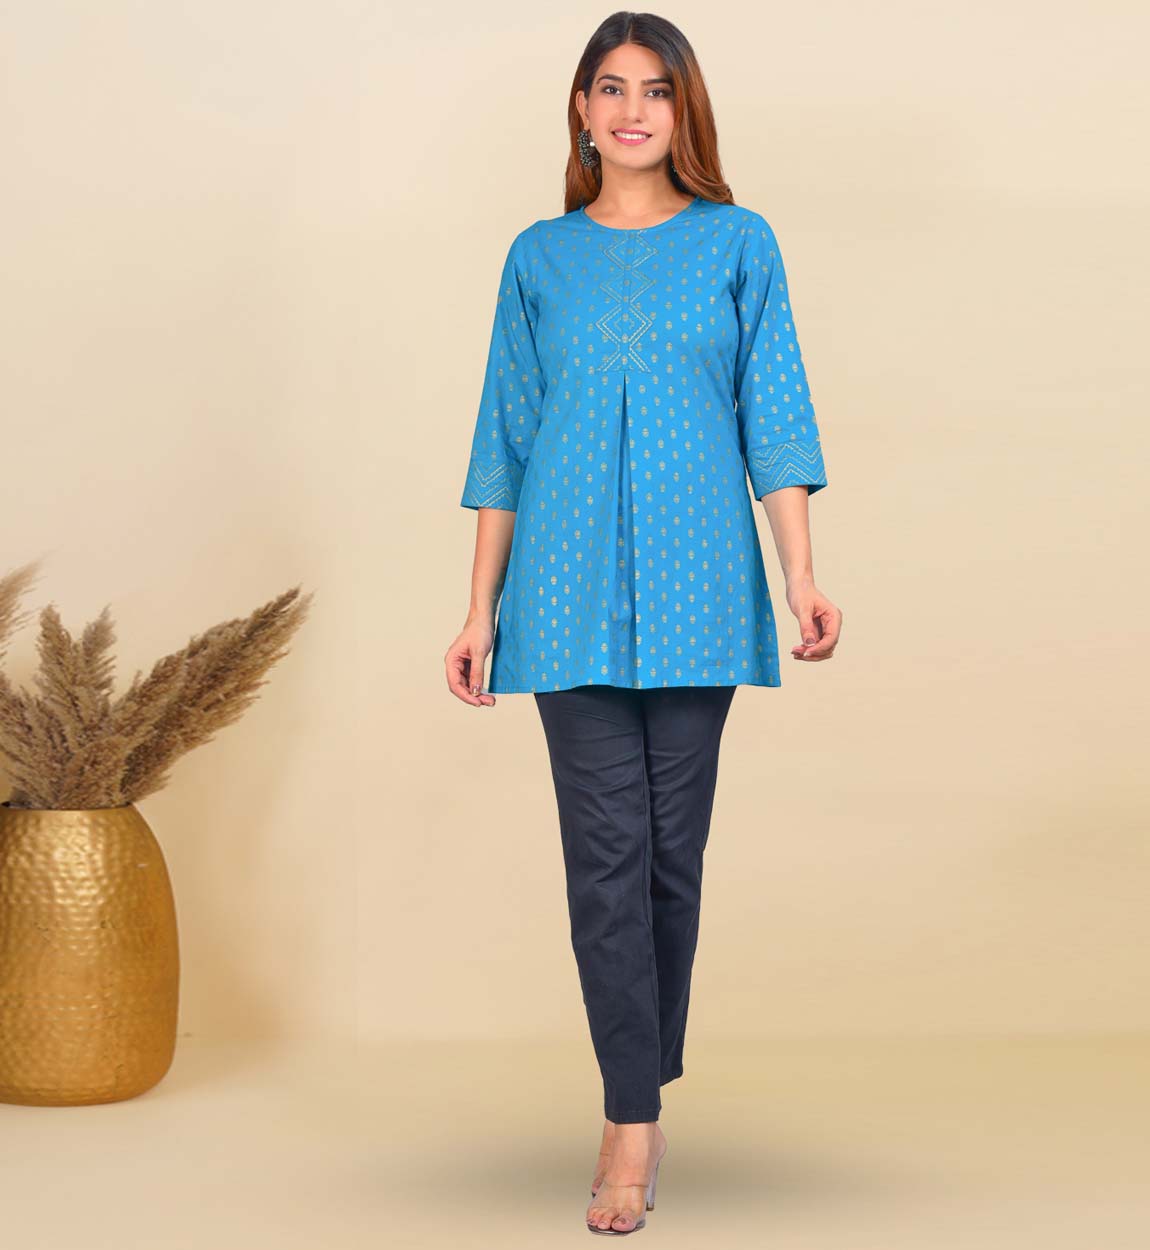 Buy Navy Blue Floral Printed Short Kurti Online in India -Beyoung